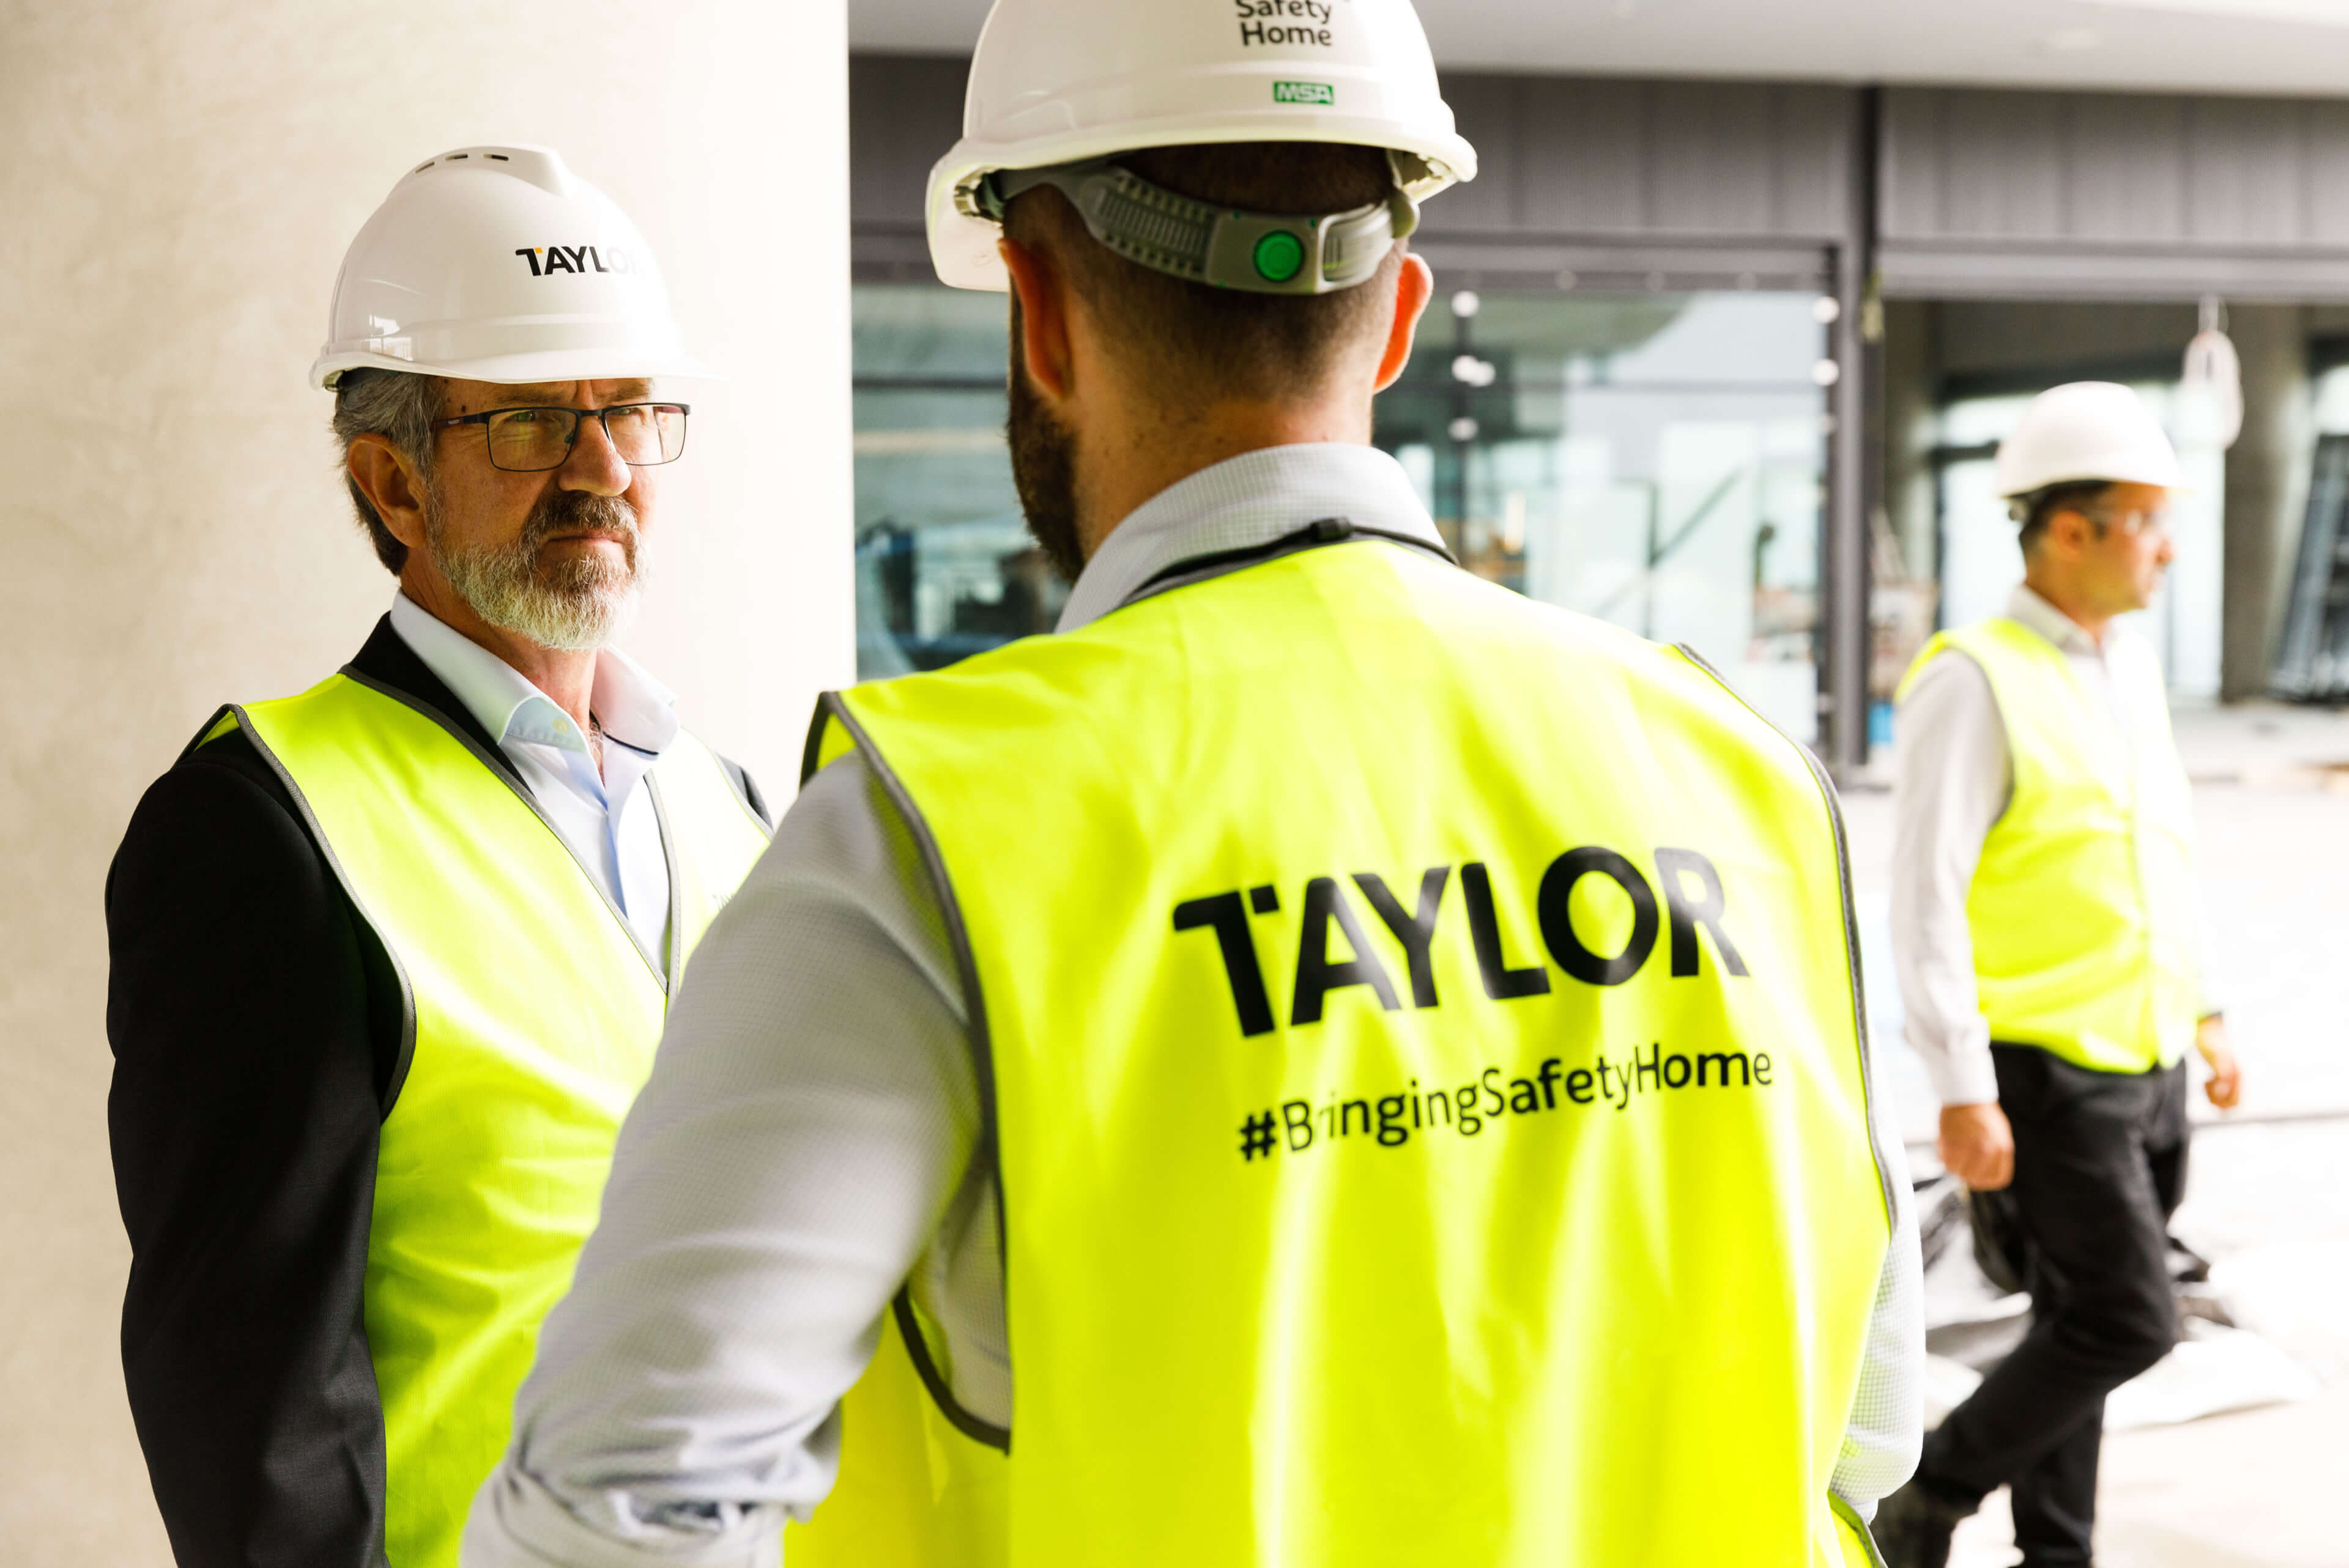 2 clive in discussion with taylor team onsite taylor construction photography bringing safety home